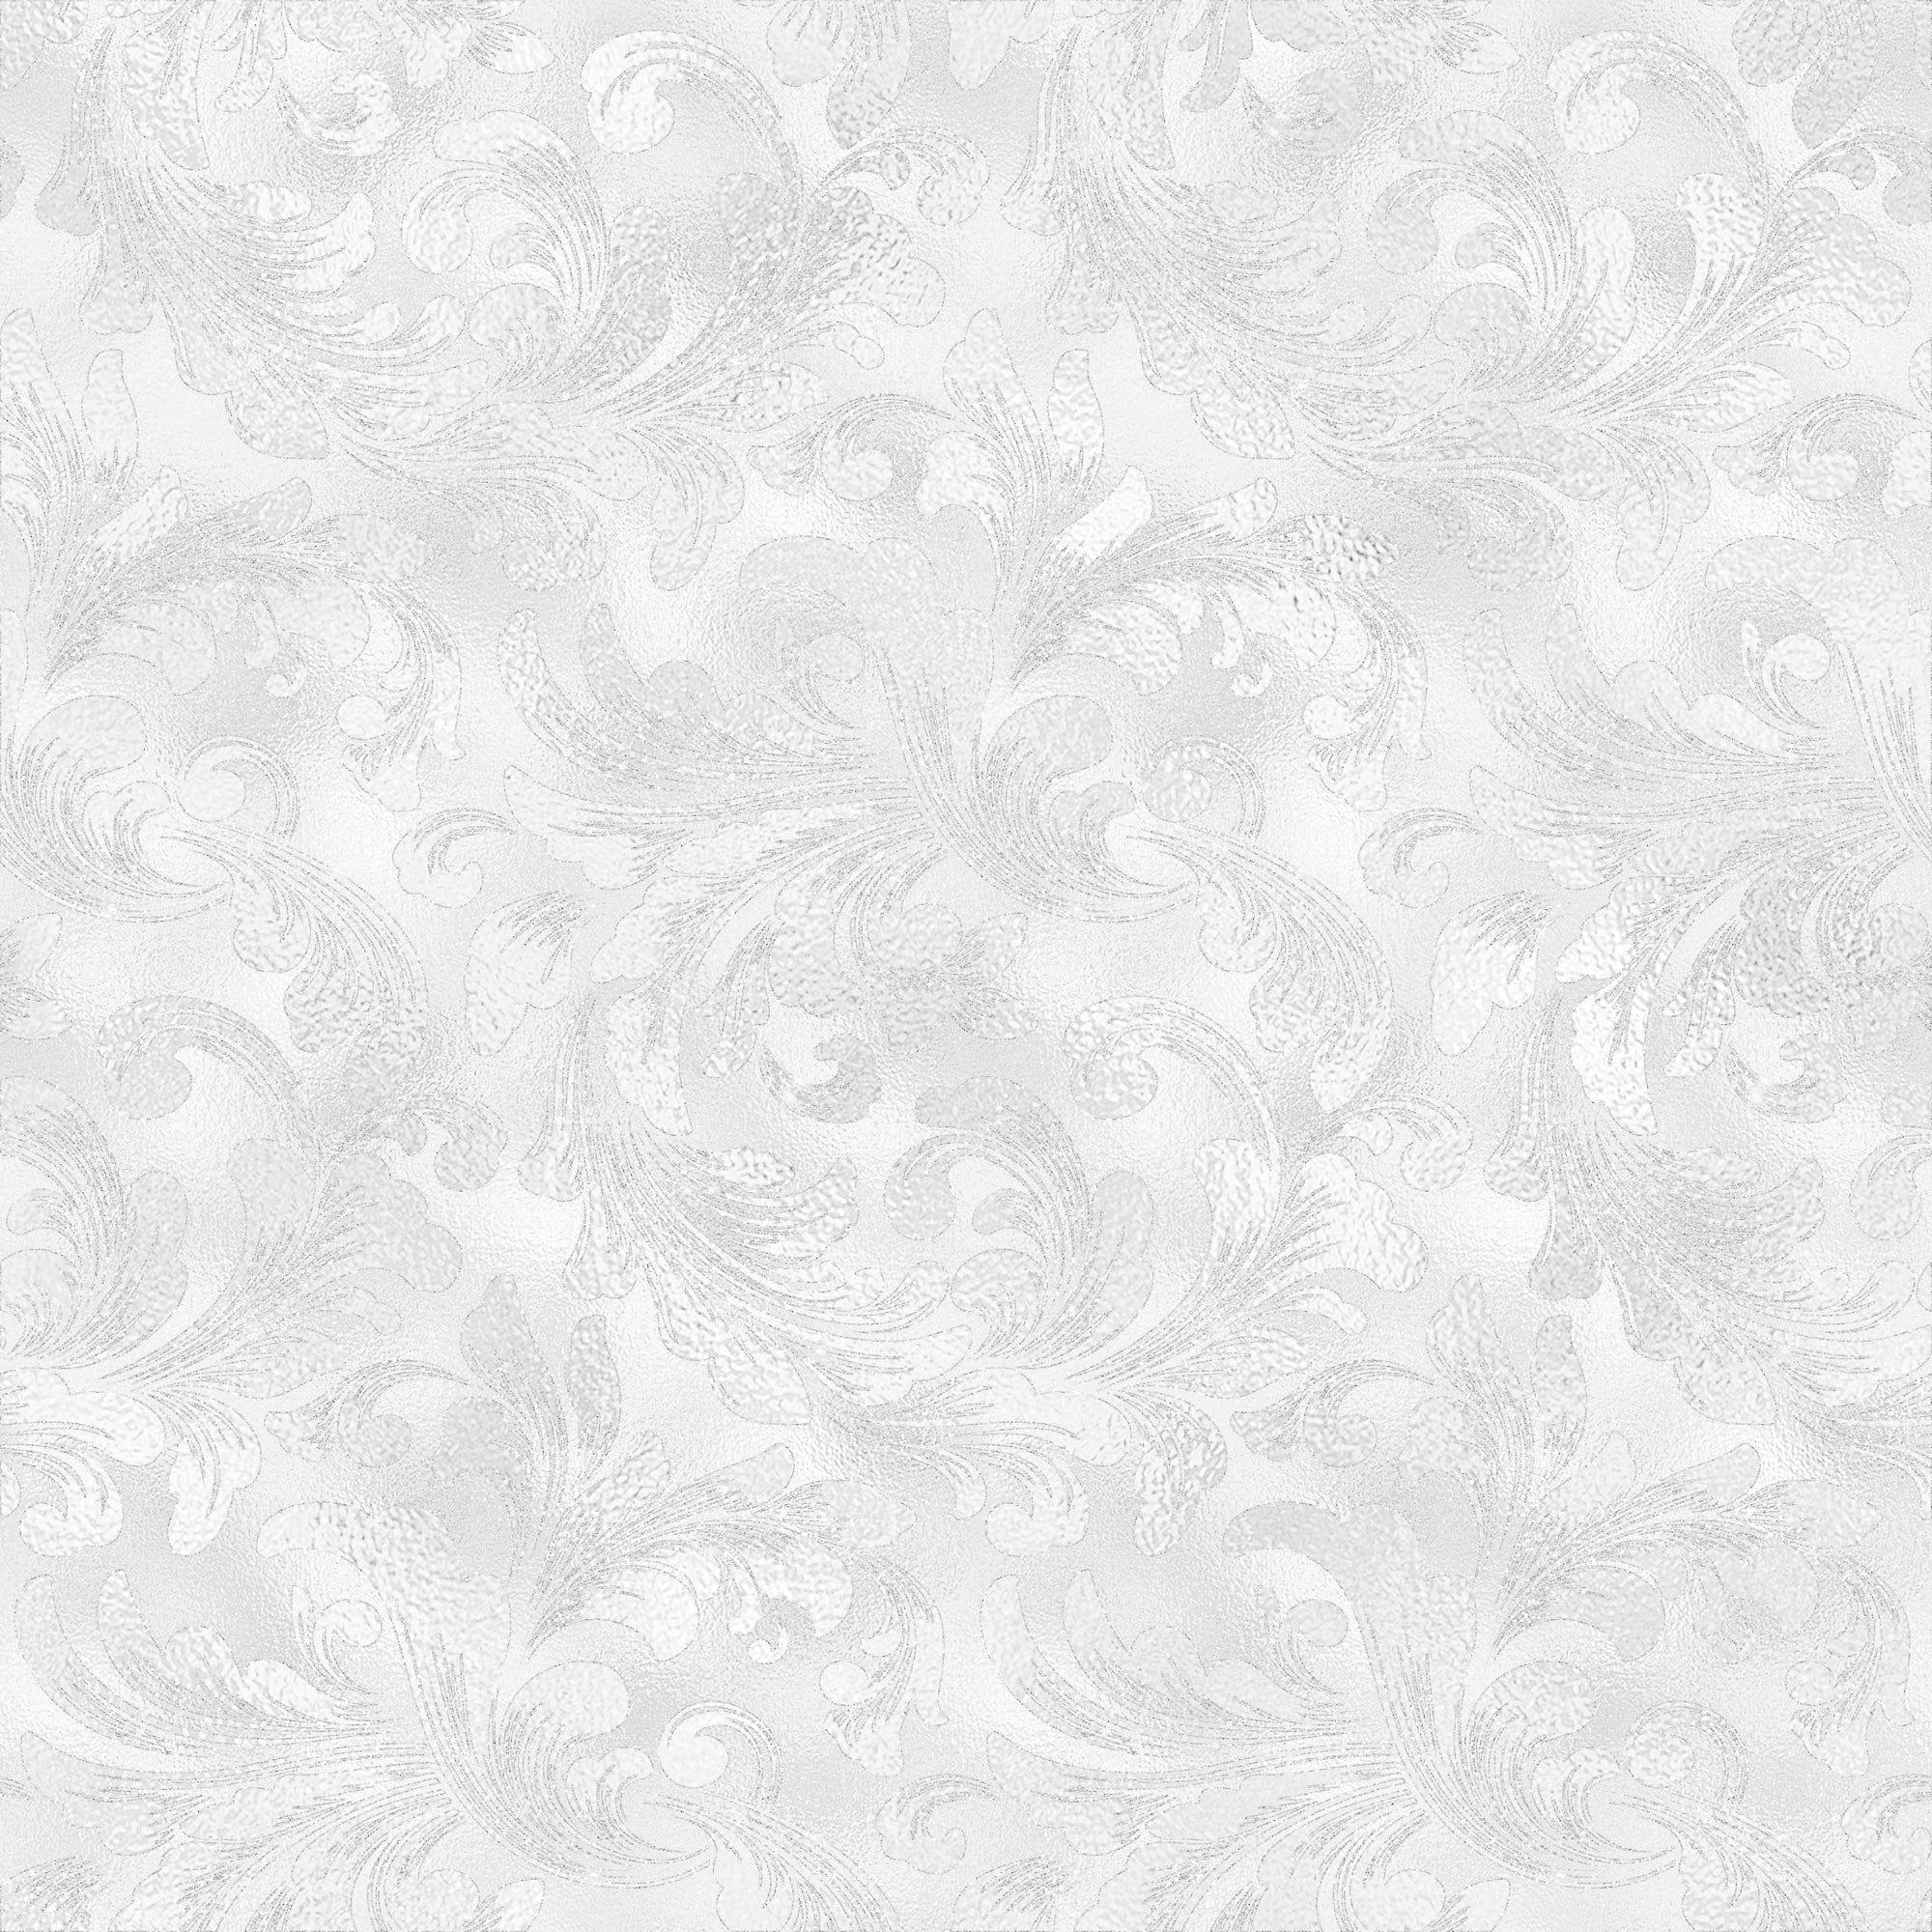 Prom Night Collection Elegant Evening 12 x 12 Double-Sided Scrapbook Paper by SSC Designs - Scrapbook Supply Companies